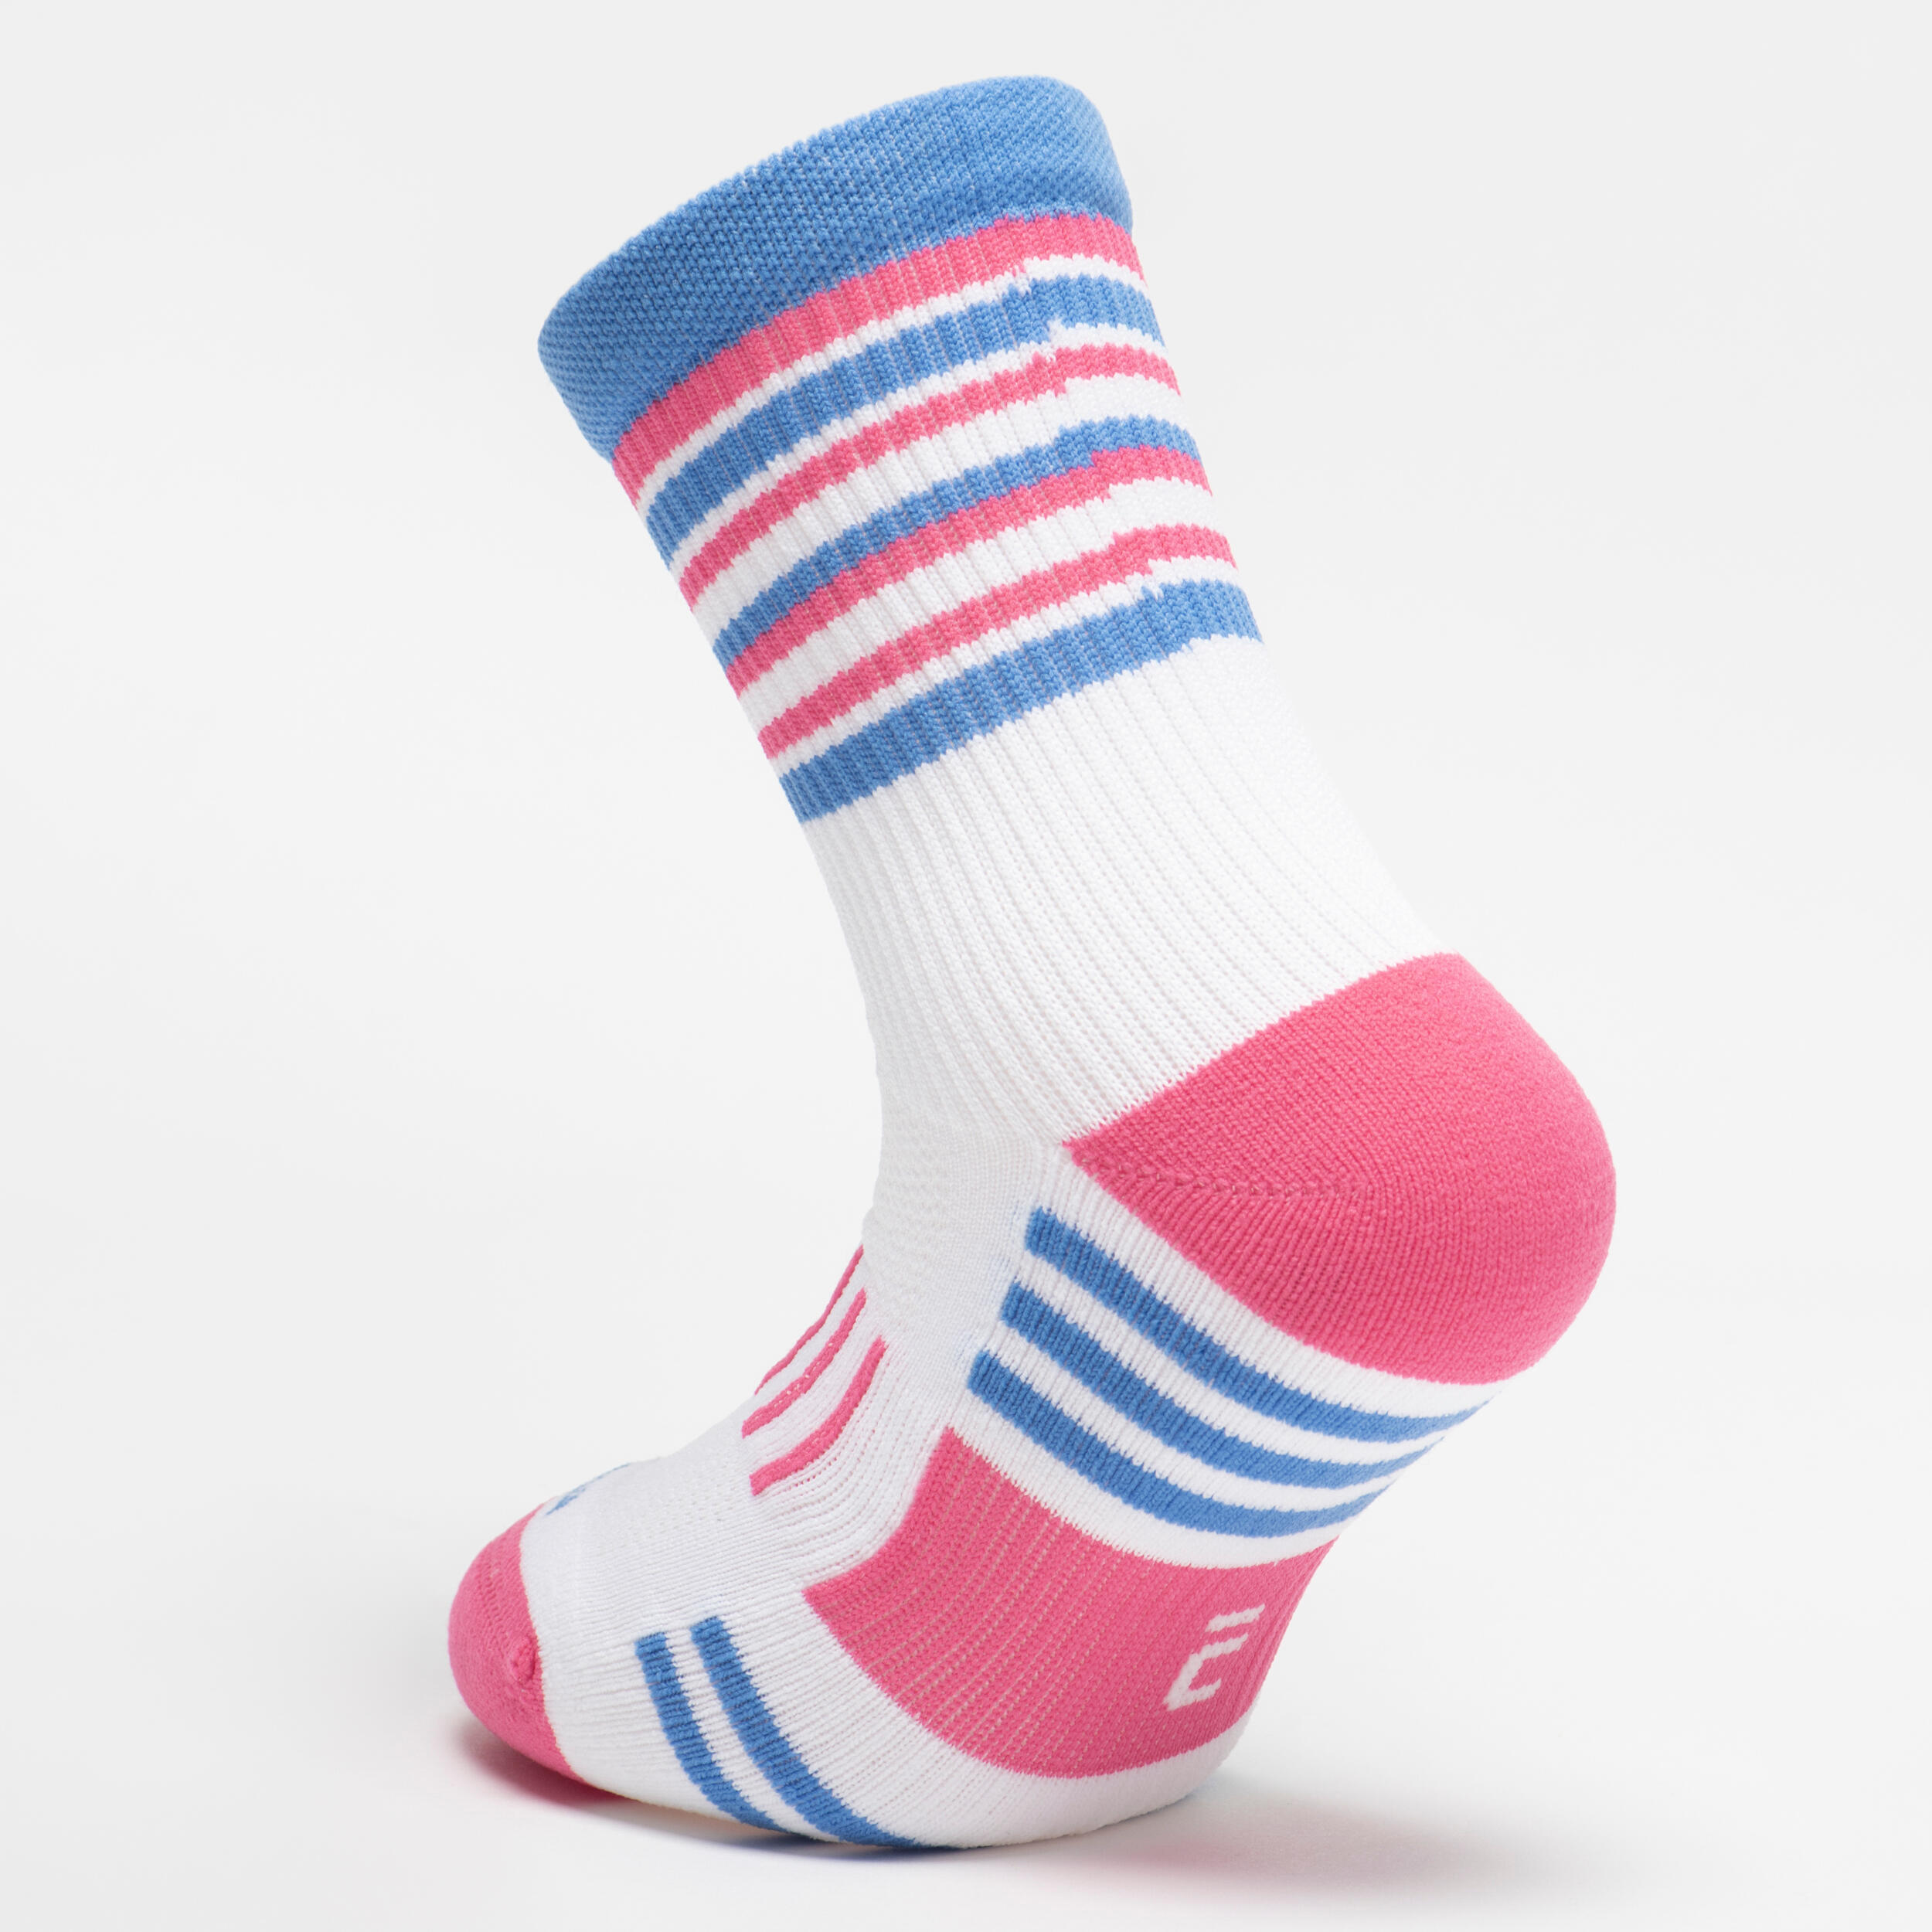 Kids' Socks AT 500 Mid 2-Pack - Plain Pink and White Pink Blue Stripes 4/13